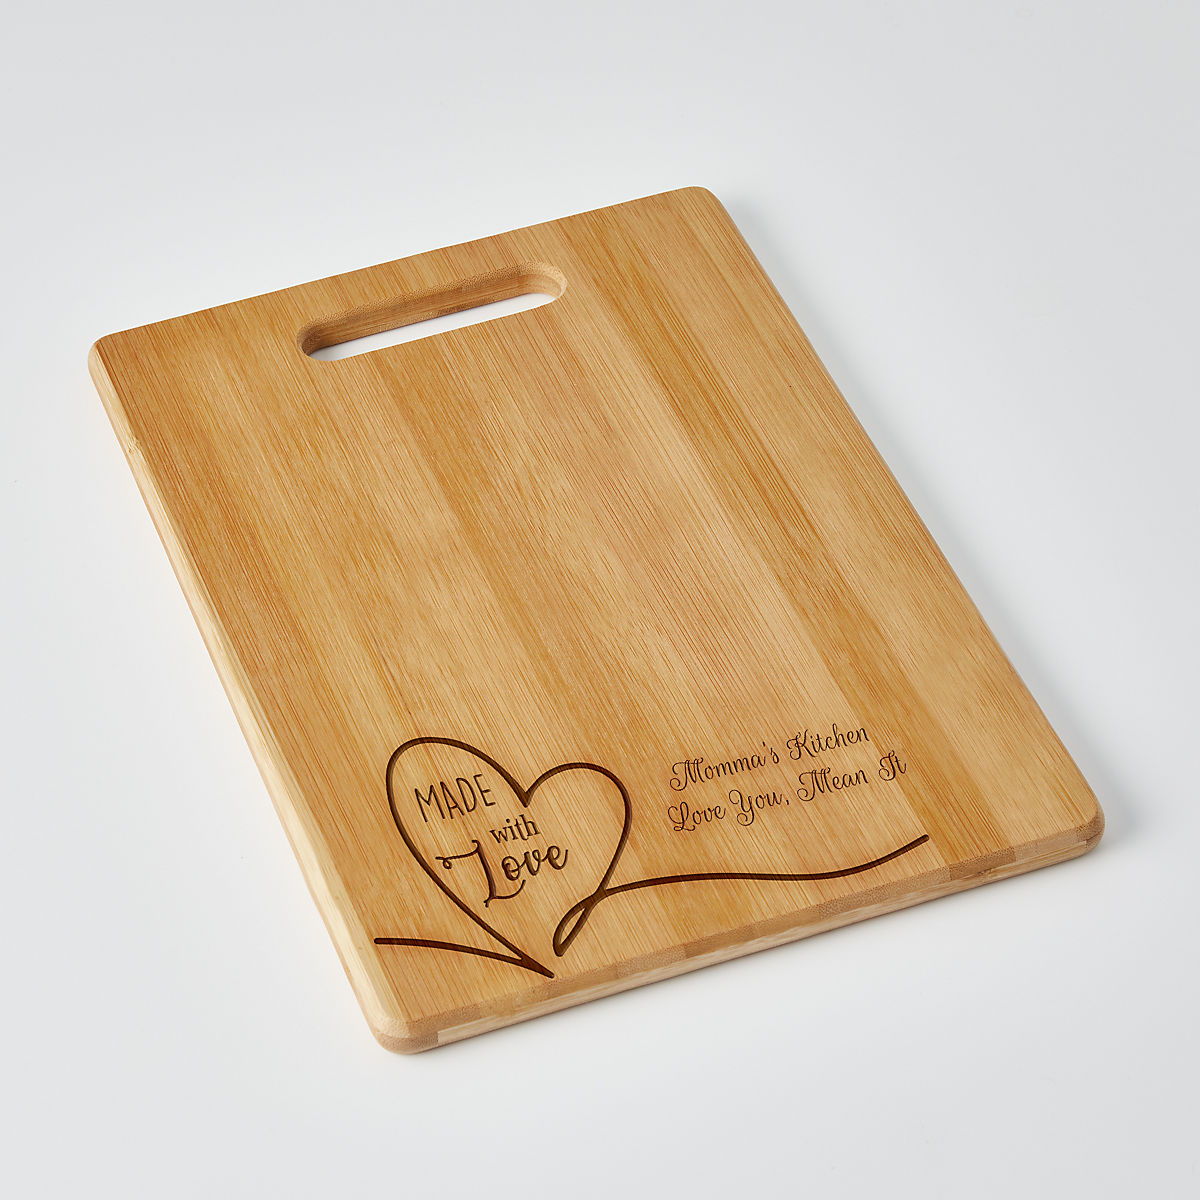 5th Anniversary Custom Engagement Gift Charcuterie Board Personalized Cutting Board Wedding Gift for Couple Bridal Shower Kitchen Gifts